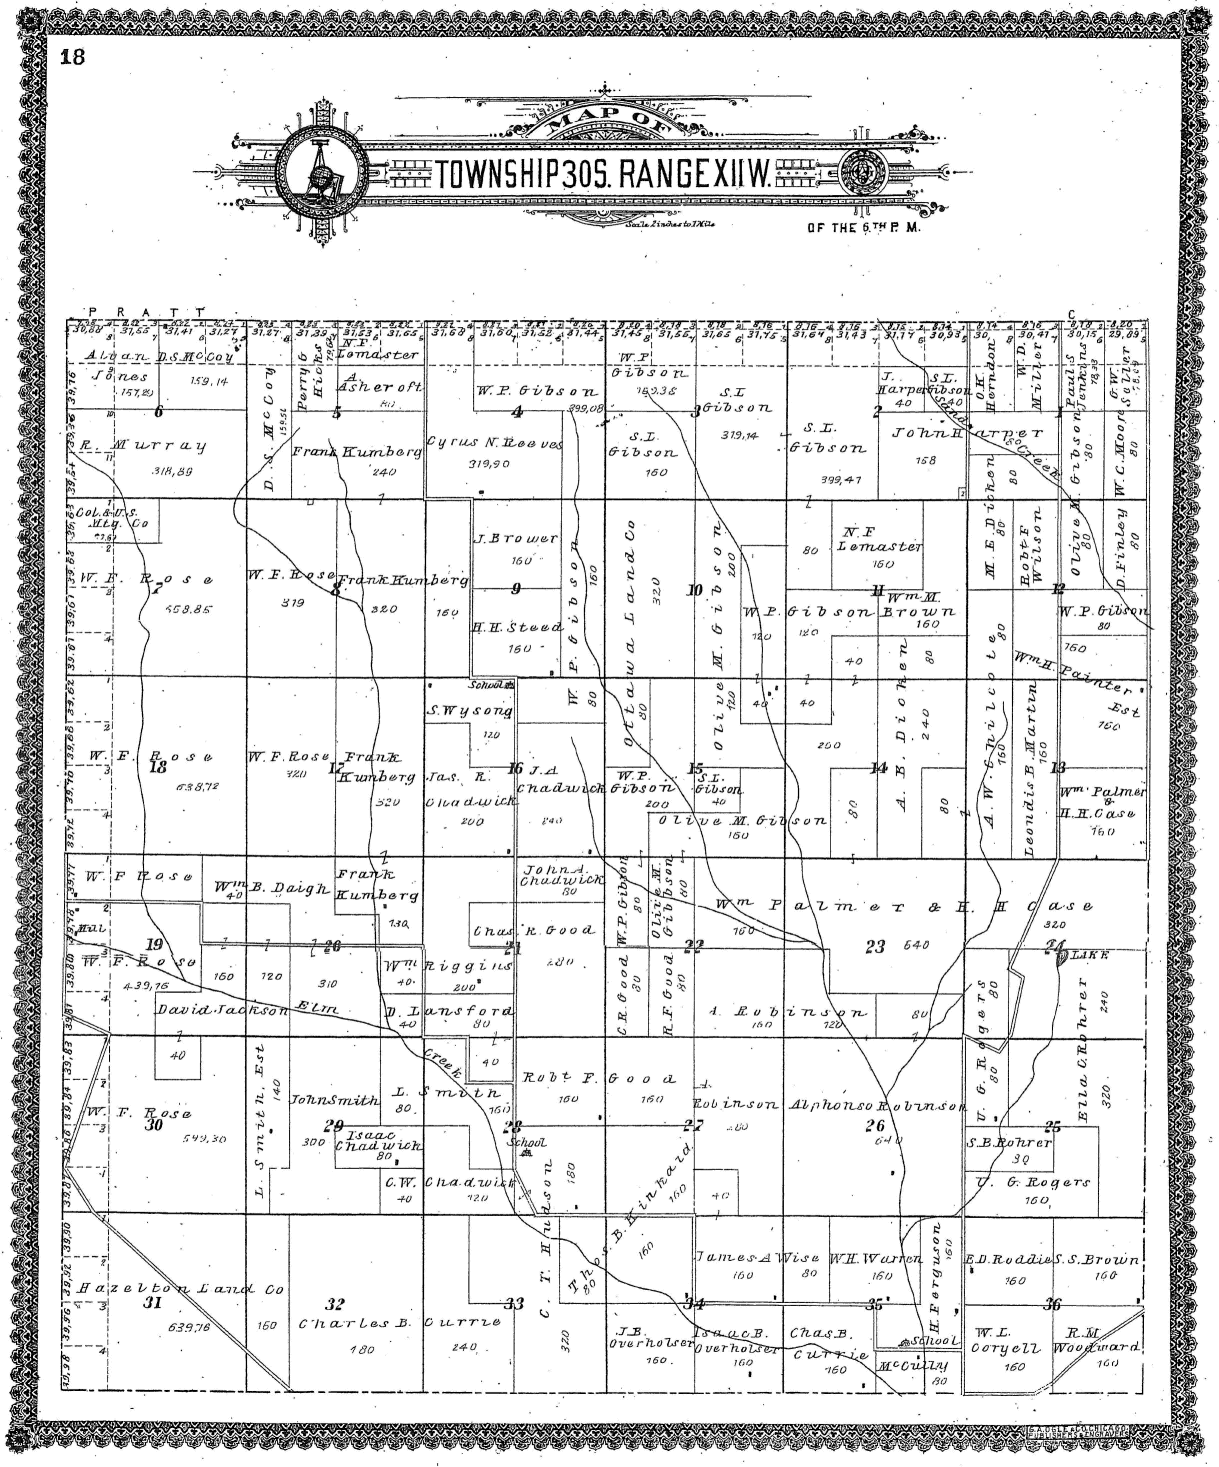 Elm Mills Township 30S. Range XIIW of the 6th P.M., G.A. Ogle Map, Barber County, Kansas